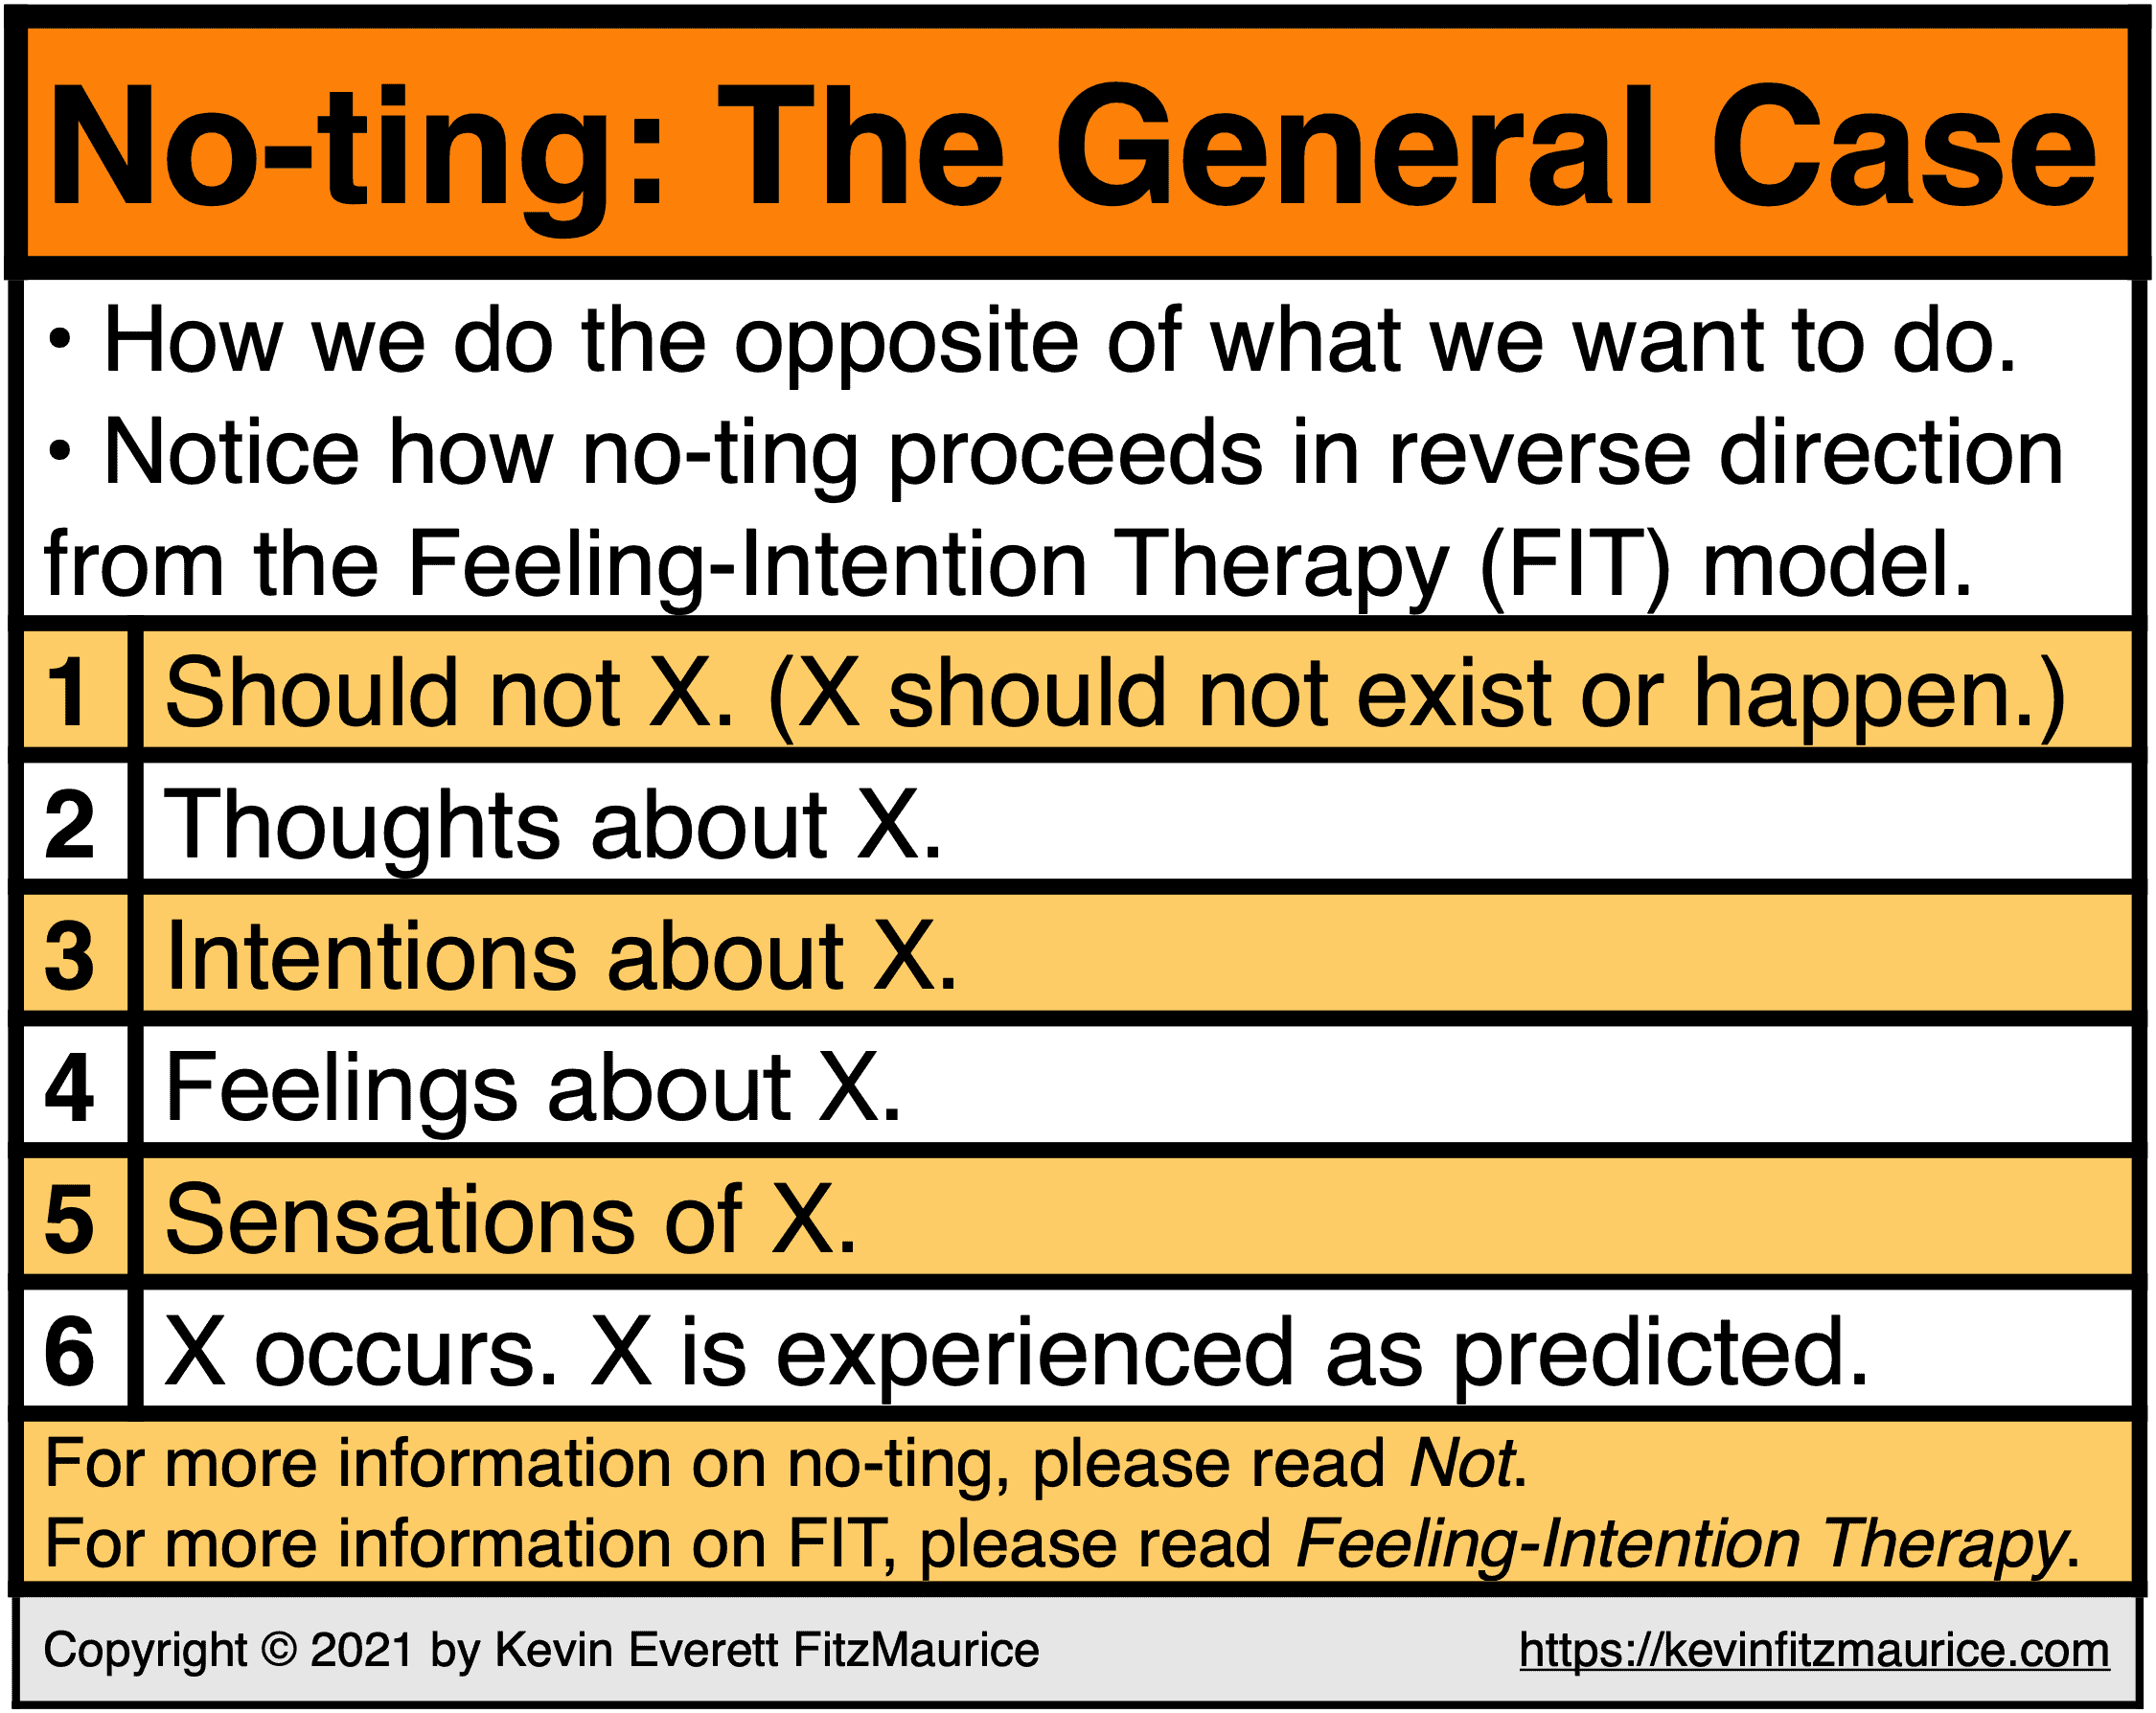 No-ting: The General Case